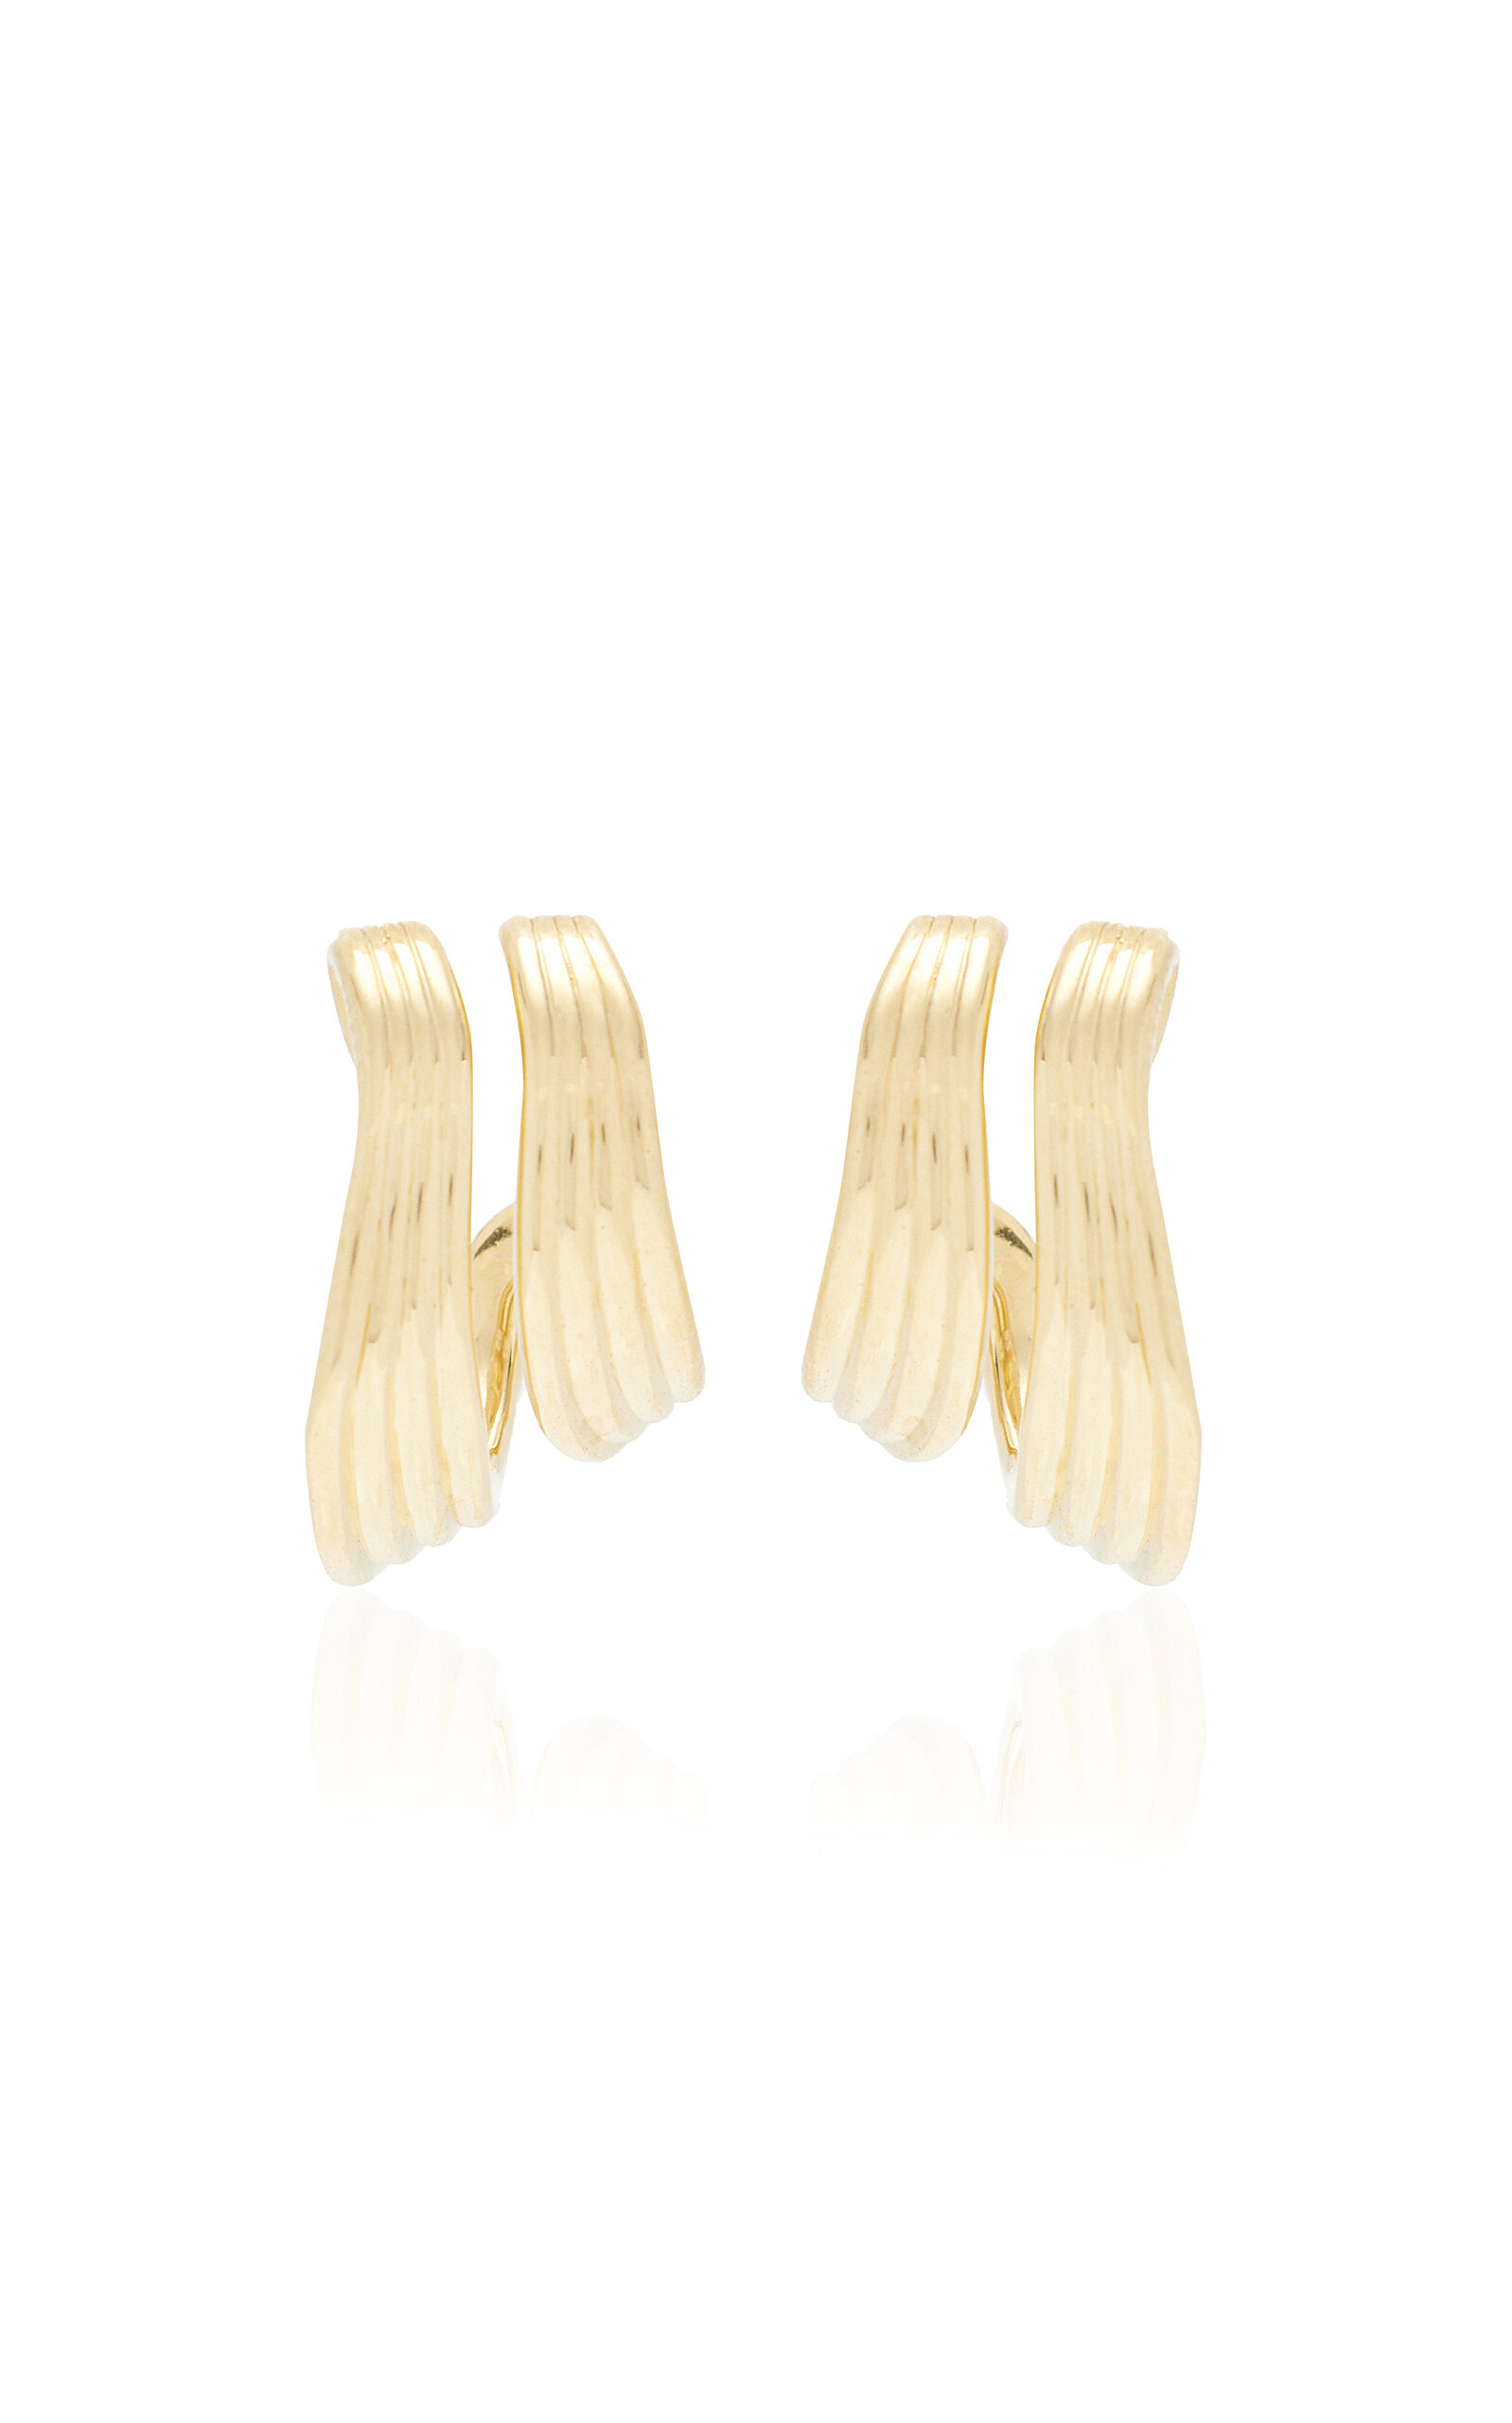 The Stream Lines 18K Yellow Gold Earrings